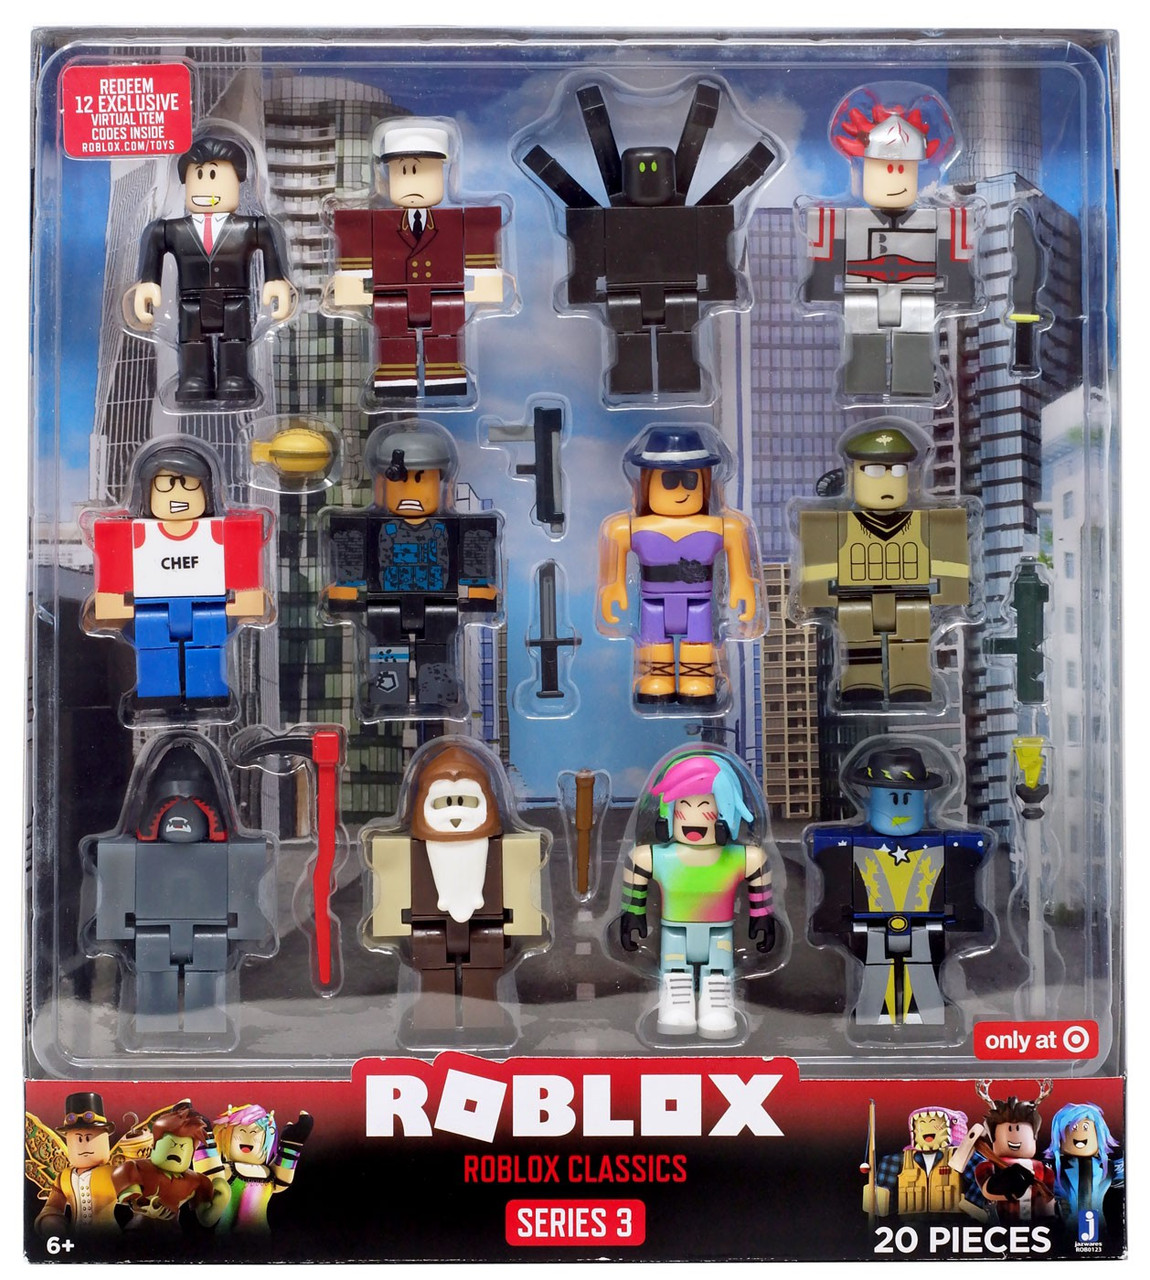 Series 3 Roblox Classics Exclusive Action Figure 12 Pack - roblox exclusive online codes only celebrity gold series 1 2 3 4 5 6 toy figures